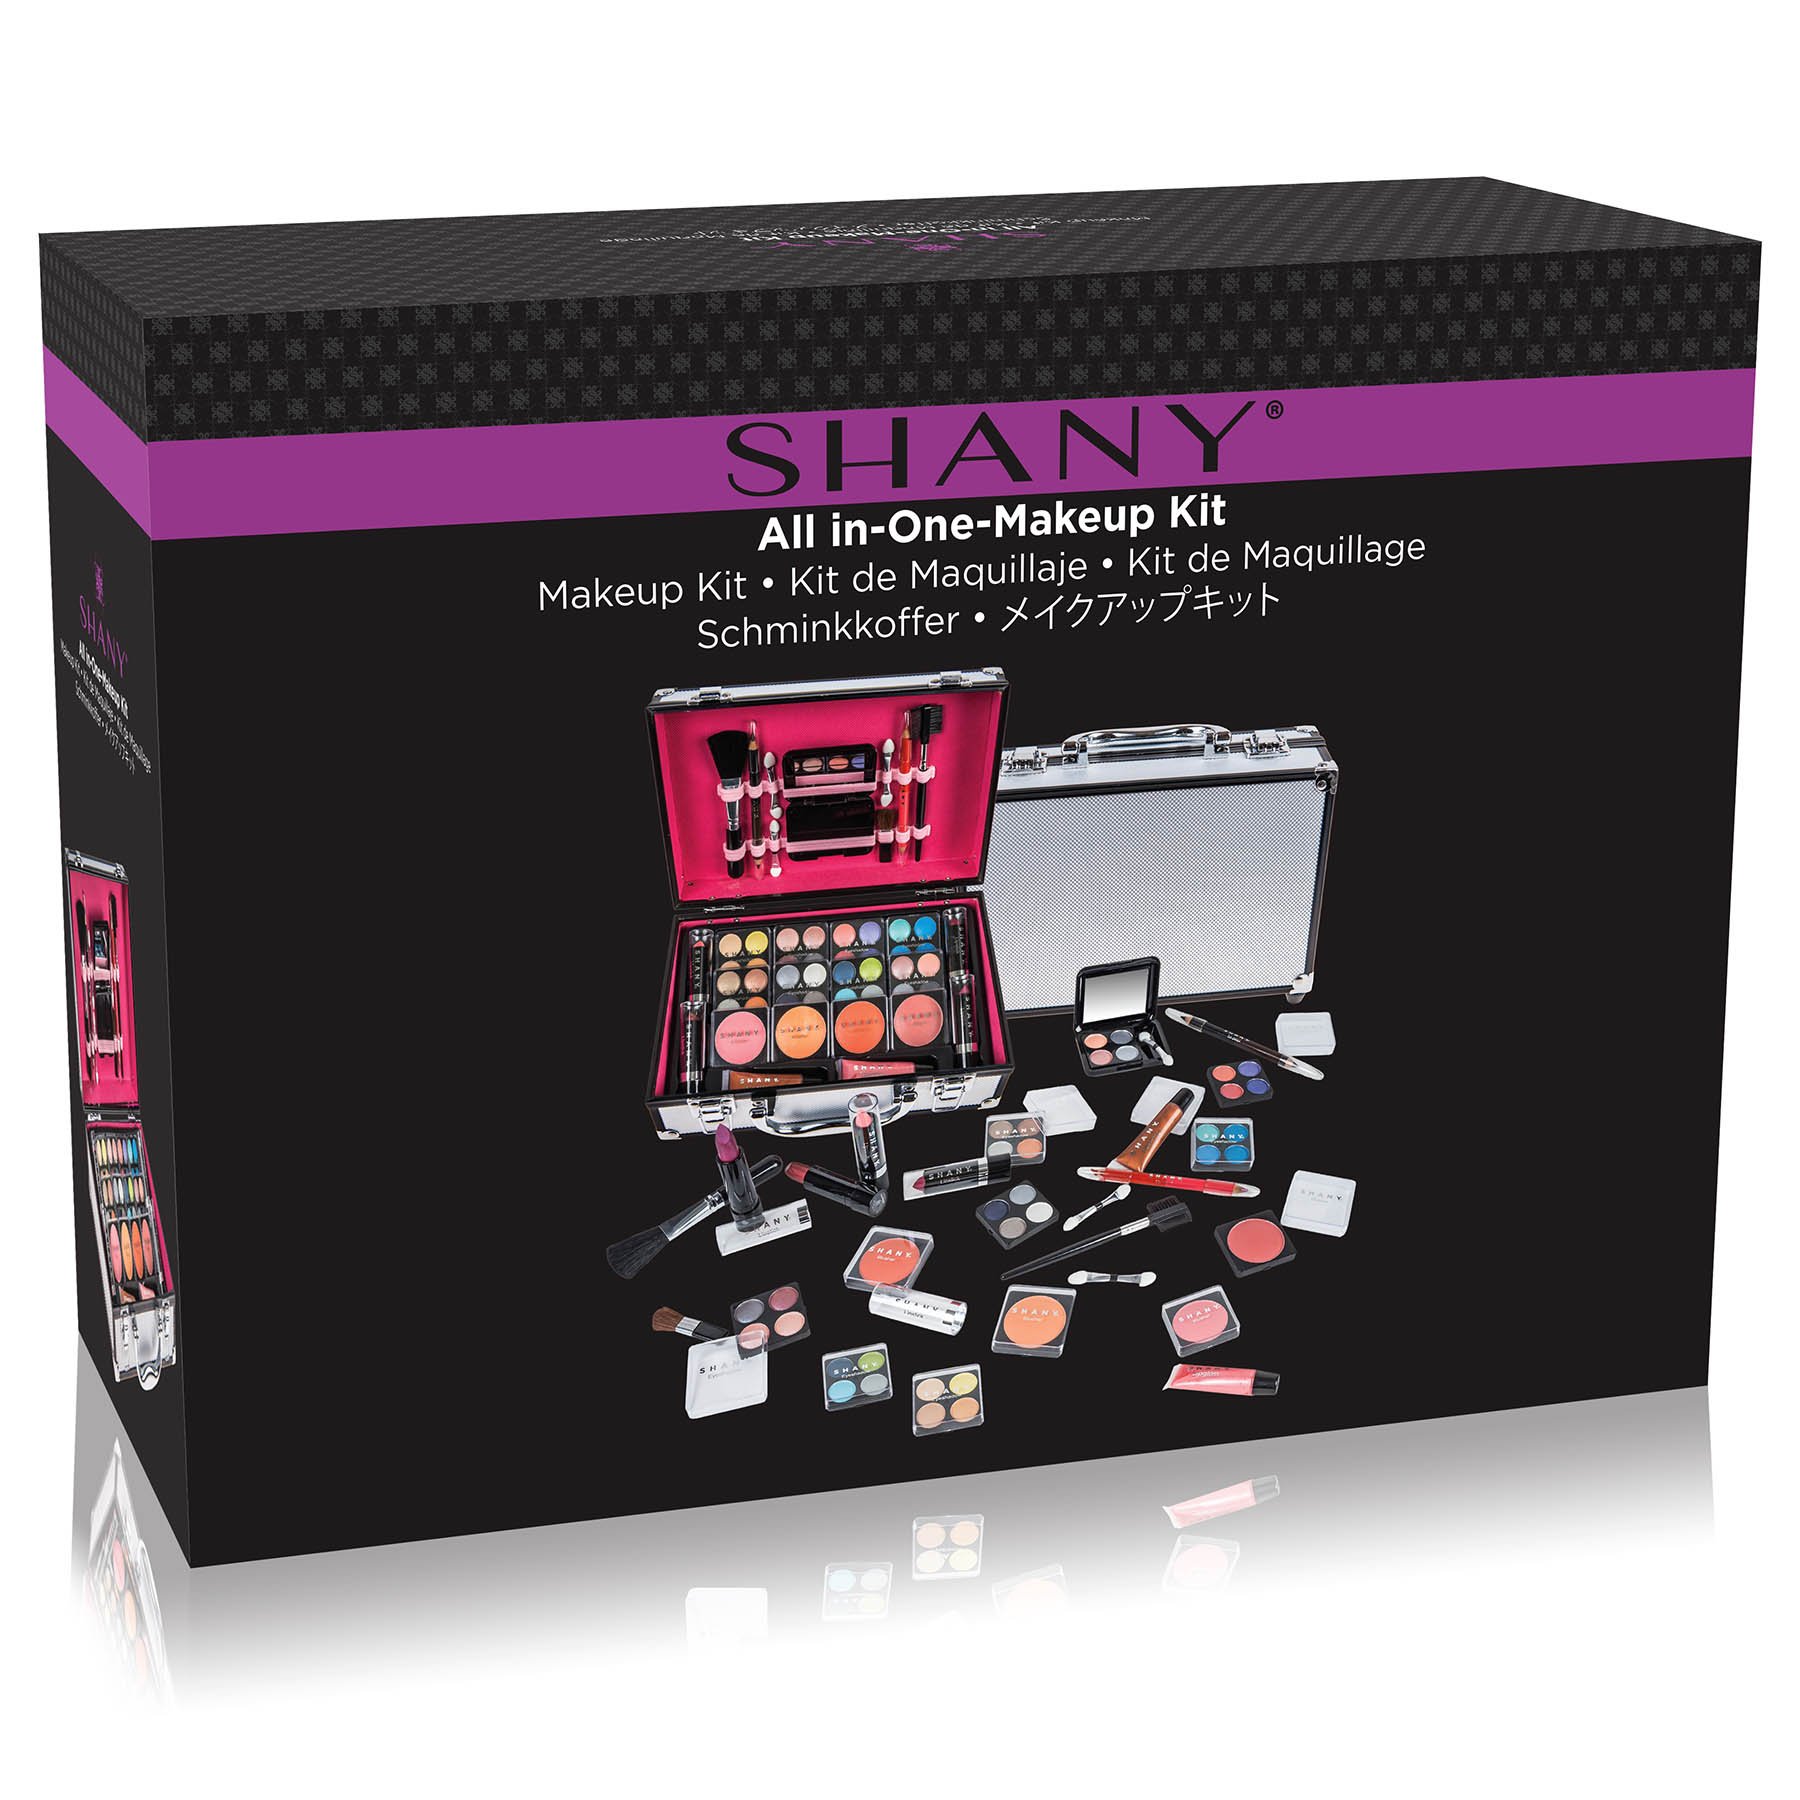 SHANY Carry All Makeup Train Case with Pro Teen Makeup Set, Makeup Brushes, Lipsticks, Eye Shadows, Blushes, and more - Silver